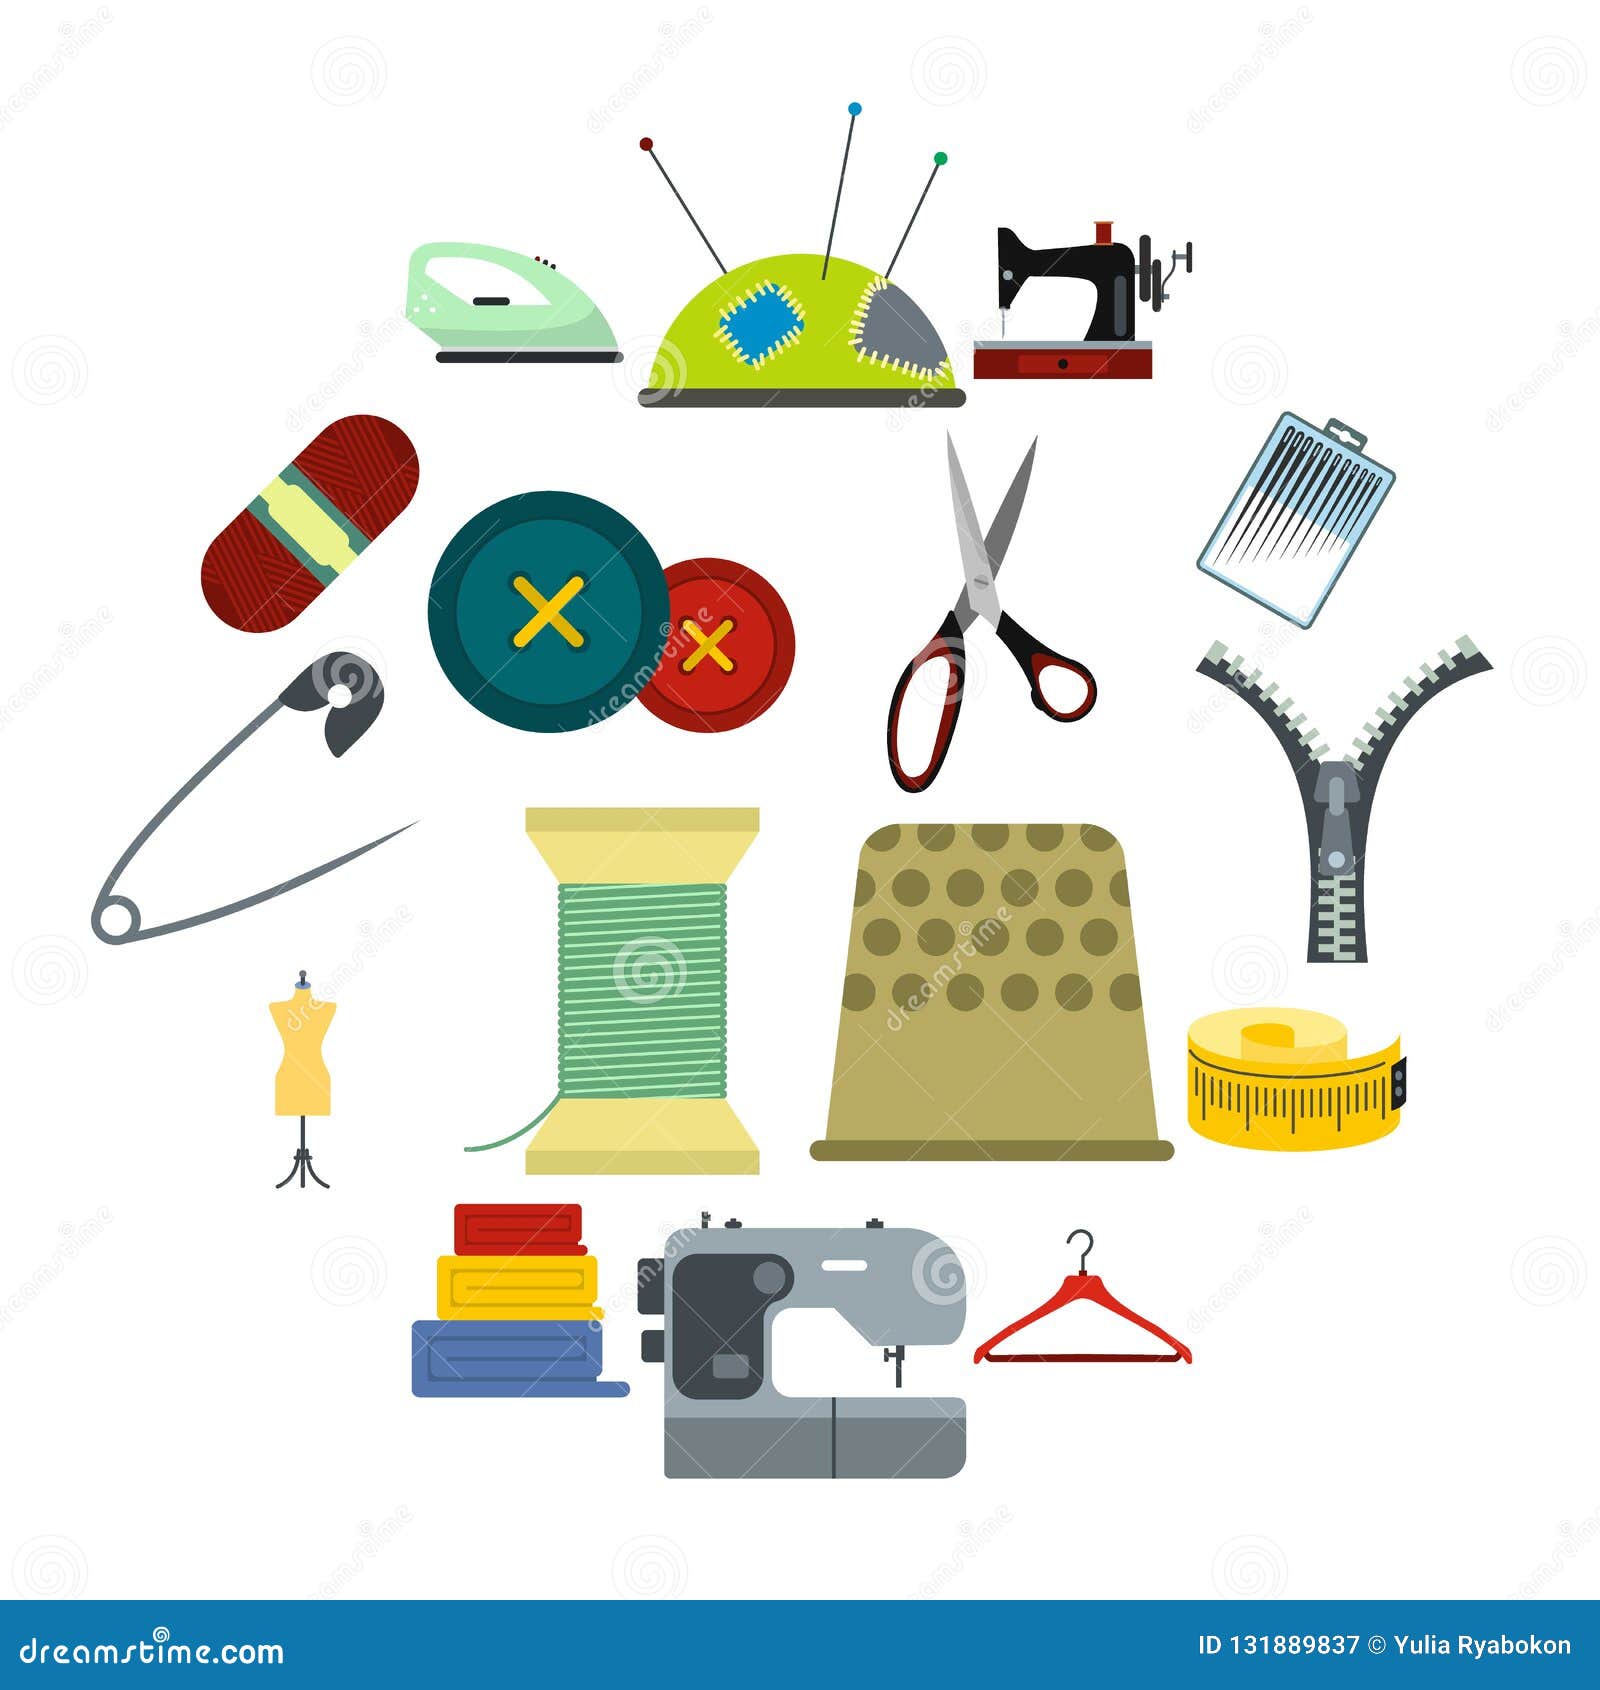 Sewing flat icon stock vector. Illustration of seamstress - 131889837